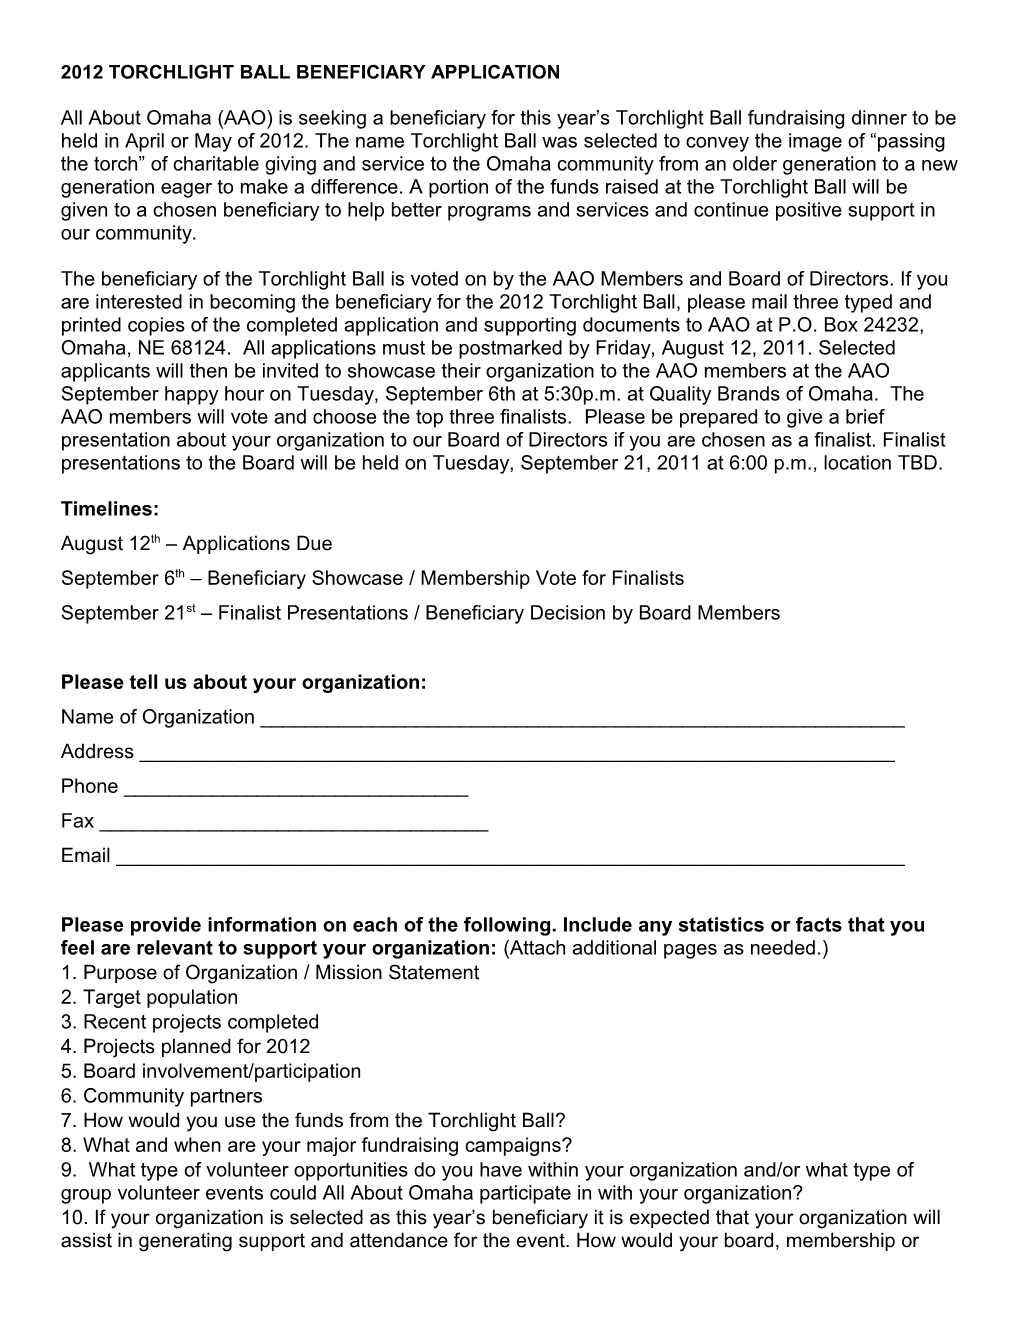 2012 Torchlight Ball Beneficiary Application